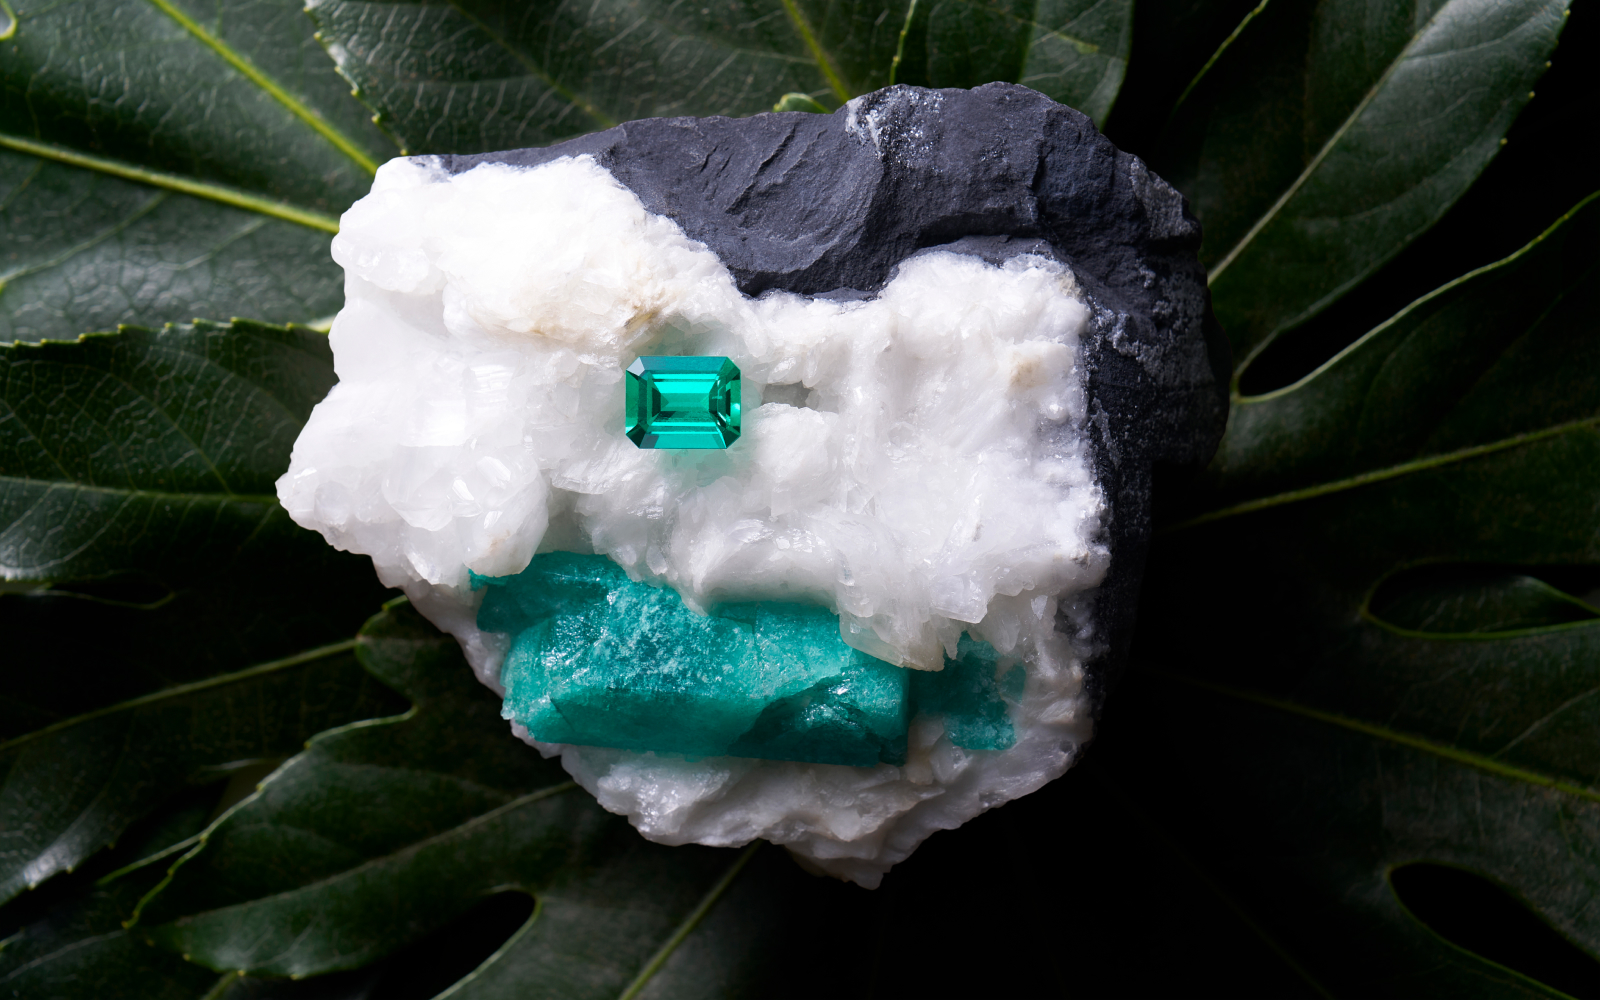 An emerald-cut Muzo emerald sits on an emerald rough specimen, image courtesy of Thomas Levy